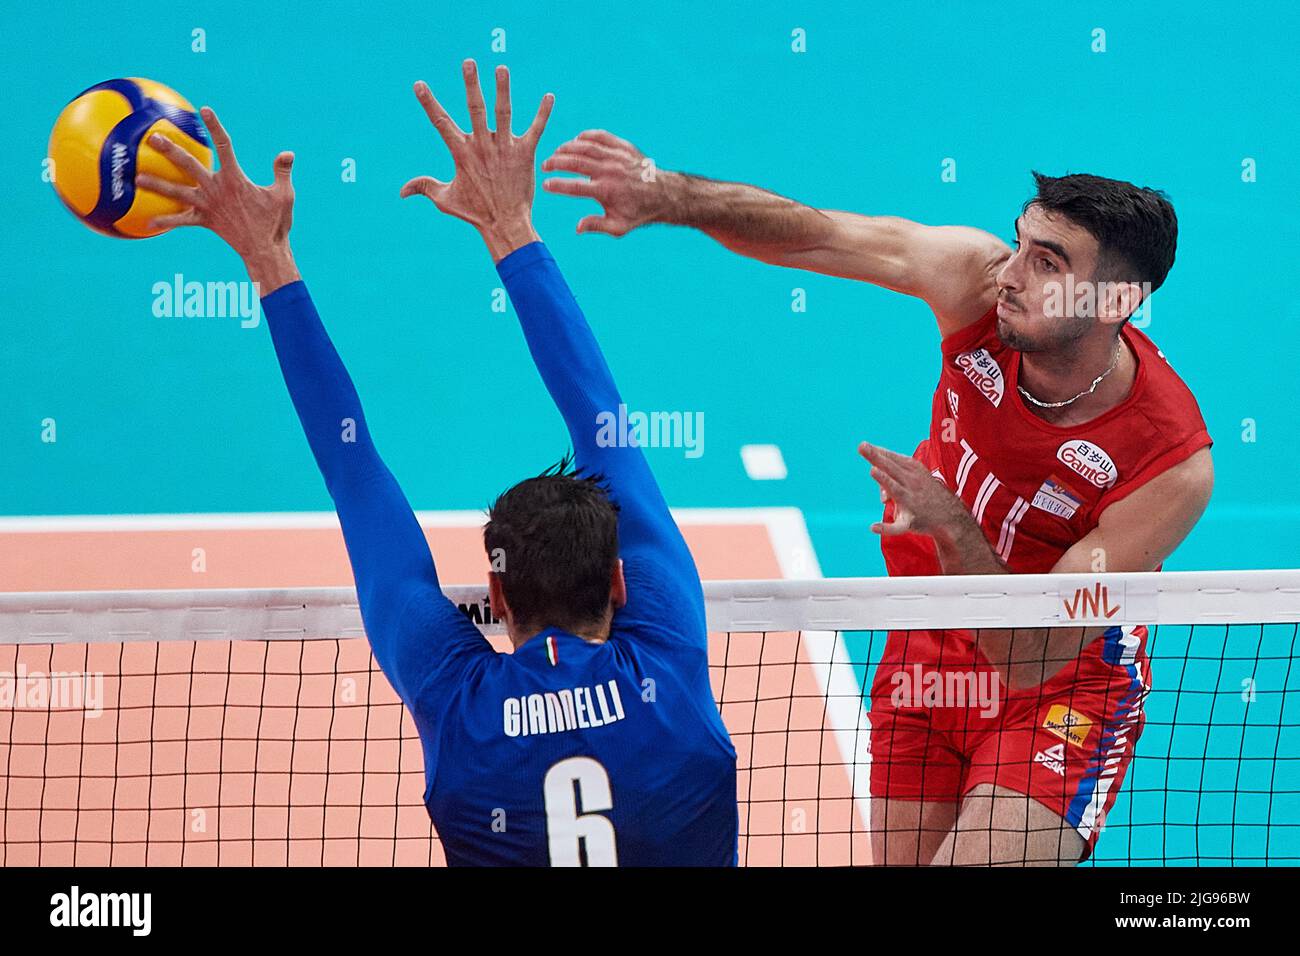 Gdansk, Poland. 08th July, 2022. Simone Giannelli (L) from Italy in action against Milan Kujundzic (R) from Serbia during the 2022 men's FIVB Volleyball Nations League match between Italy and Serbia in Gdansk, Poland, 08 July 2022. Credit: PAP/Alamy Live News Stock Photo